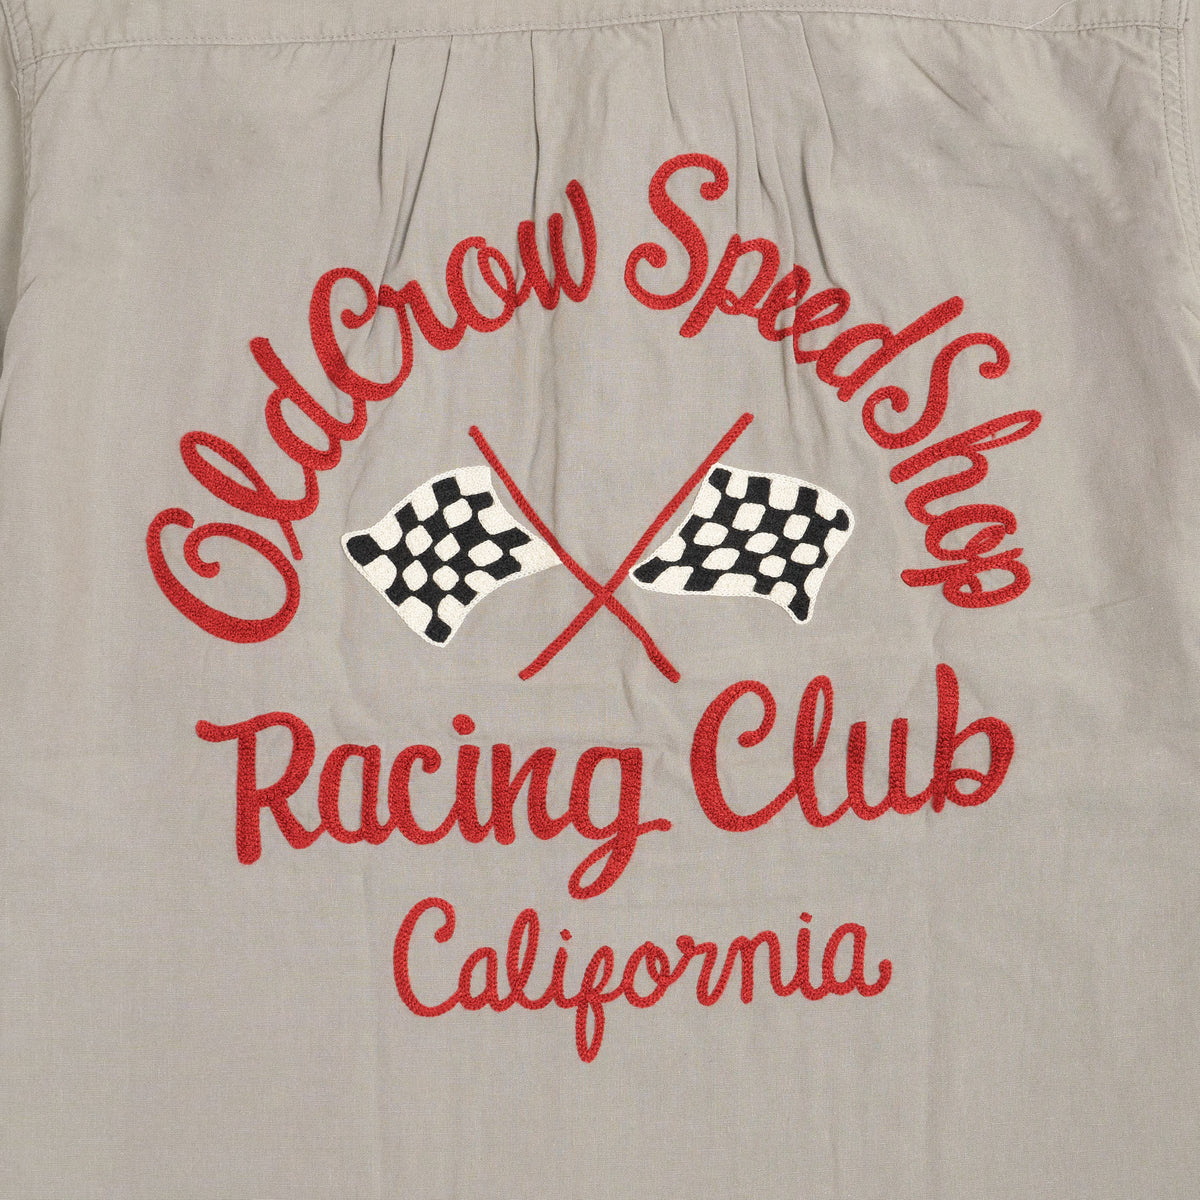 Old Crow Speed Shop by Glad Hand &amp; Co. Short Sleeve Racing Club Shirts